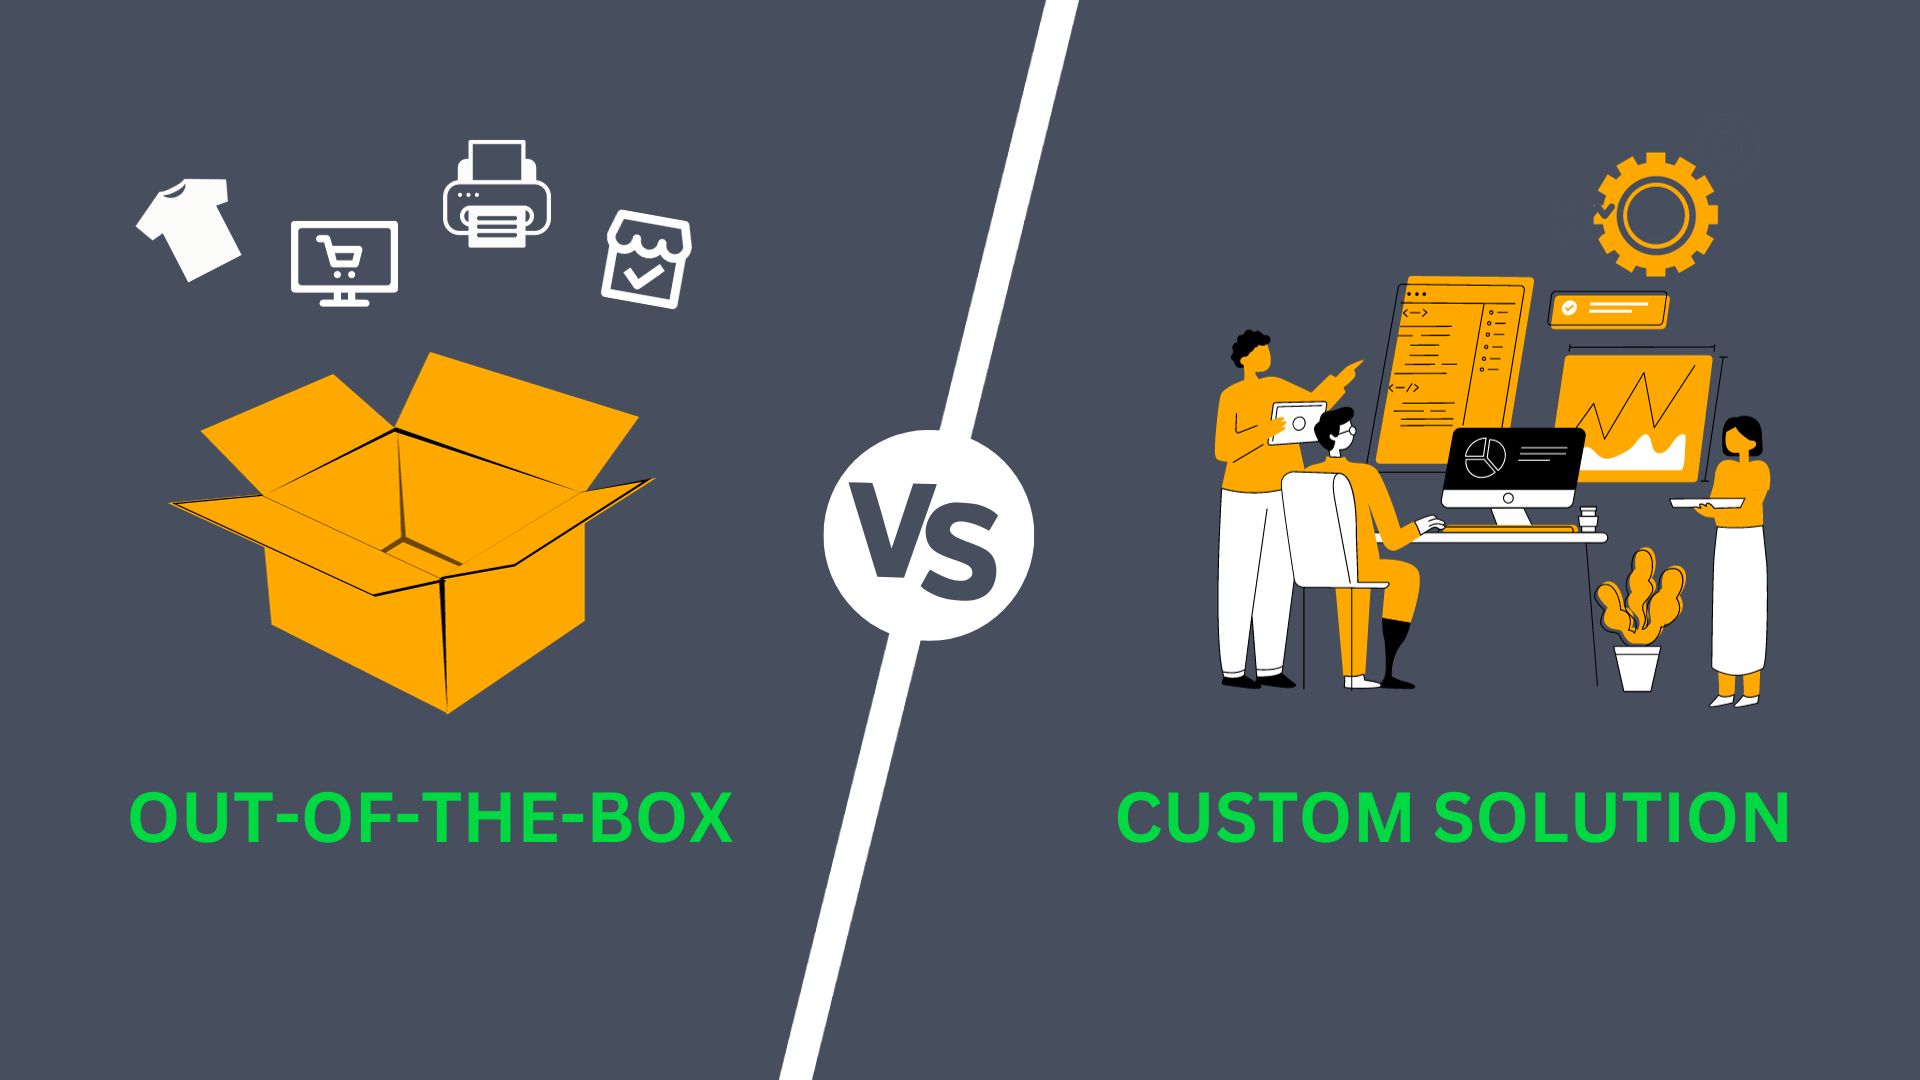 Out-of-the-box vs custom solution